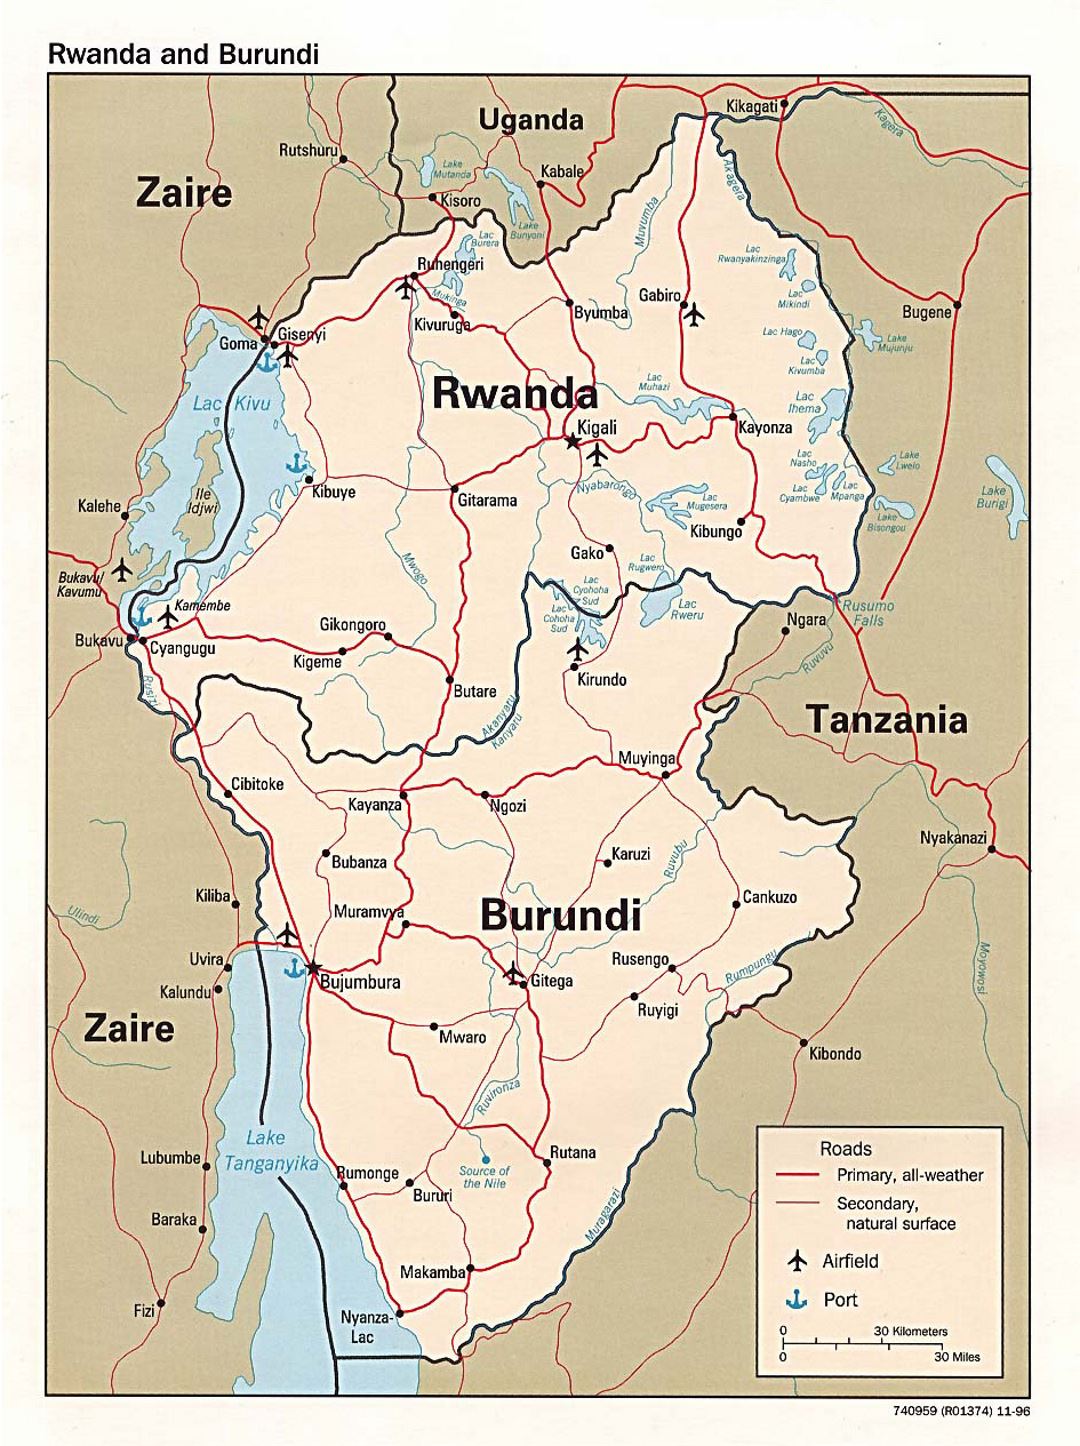 Detailed political map of Rwanda and Burundi with roads, major cities, ports and airports - 1996